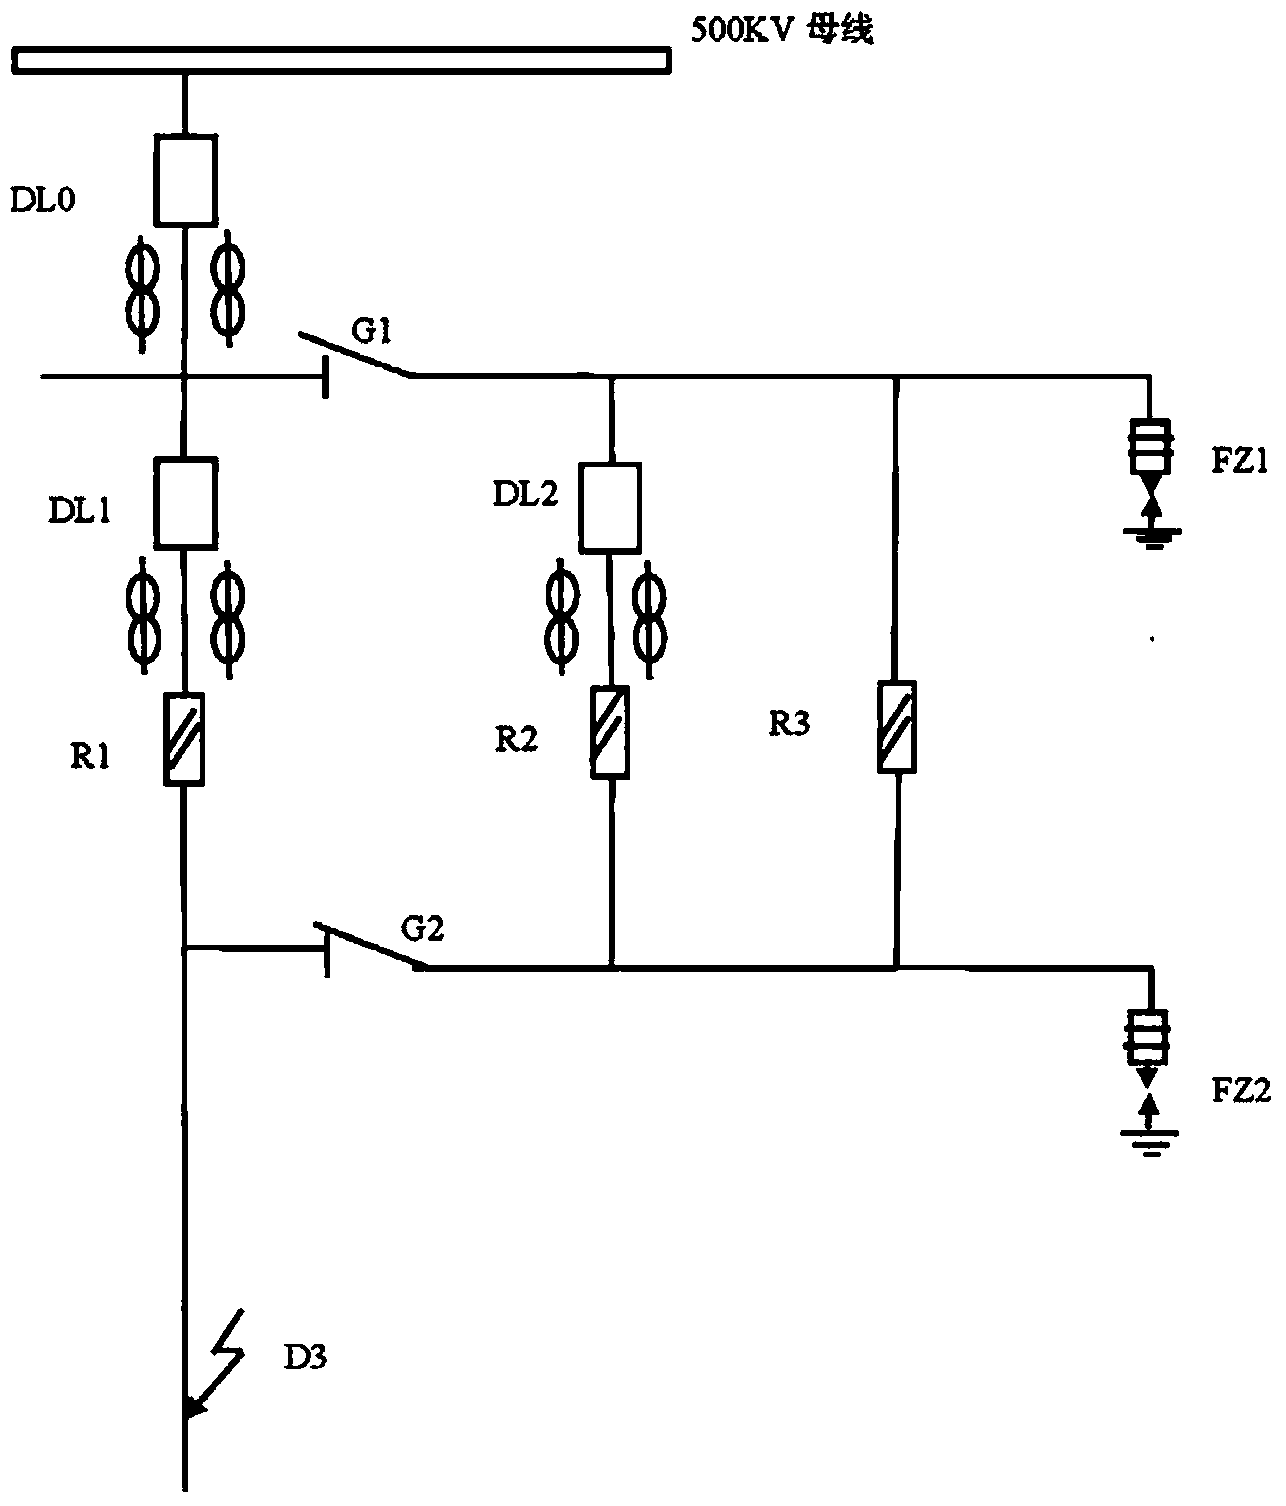 Multi-breaker and thermotropic type resistor combined grading resistance rising fault current limiter